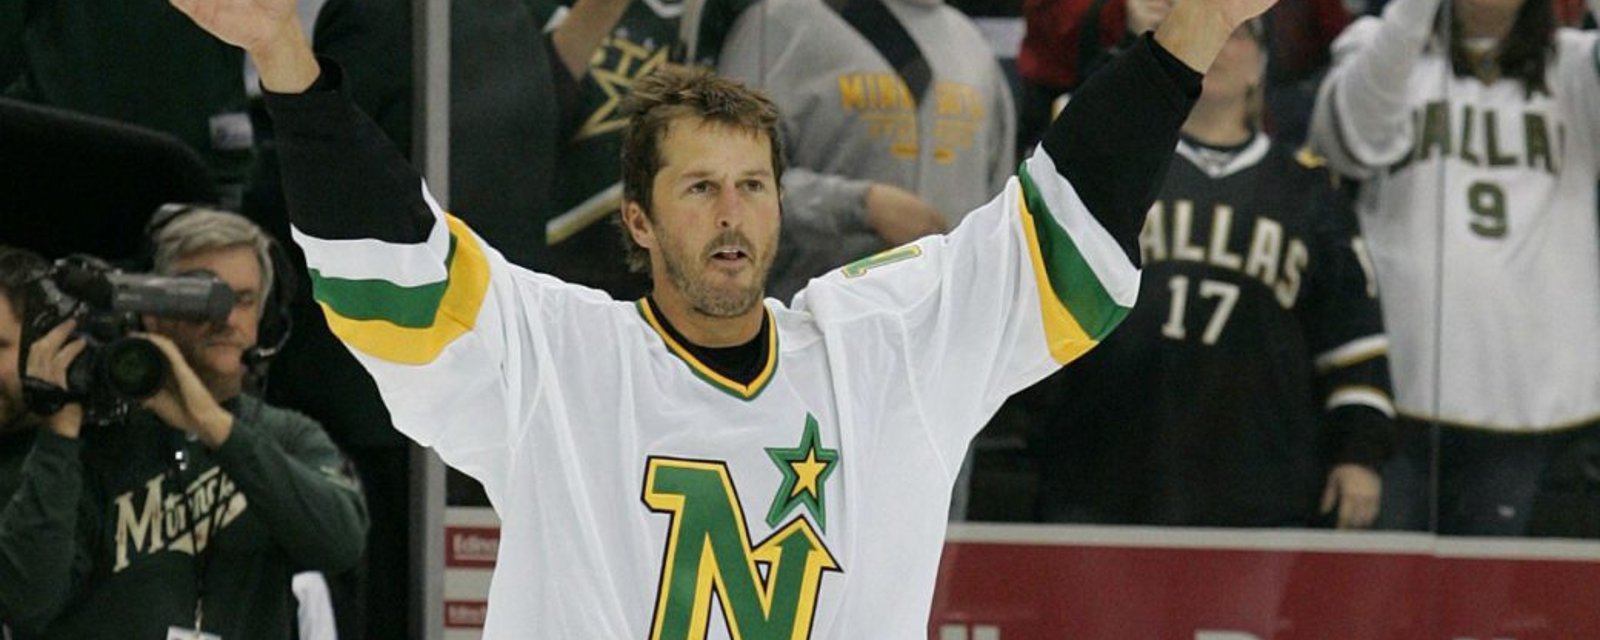 Wild adds Mike Modano to front office 